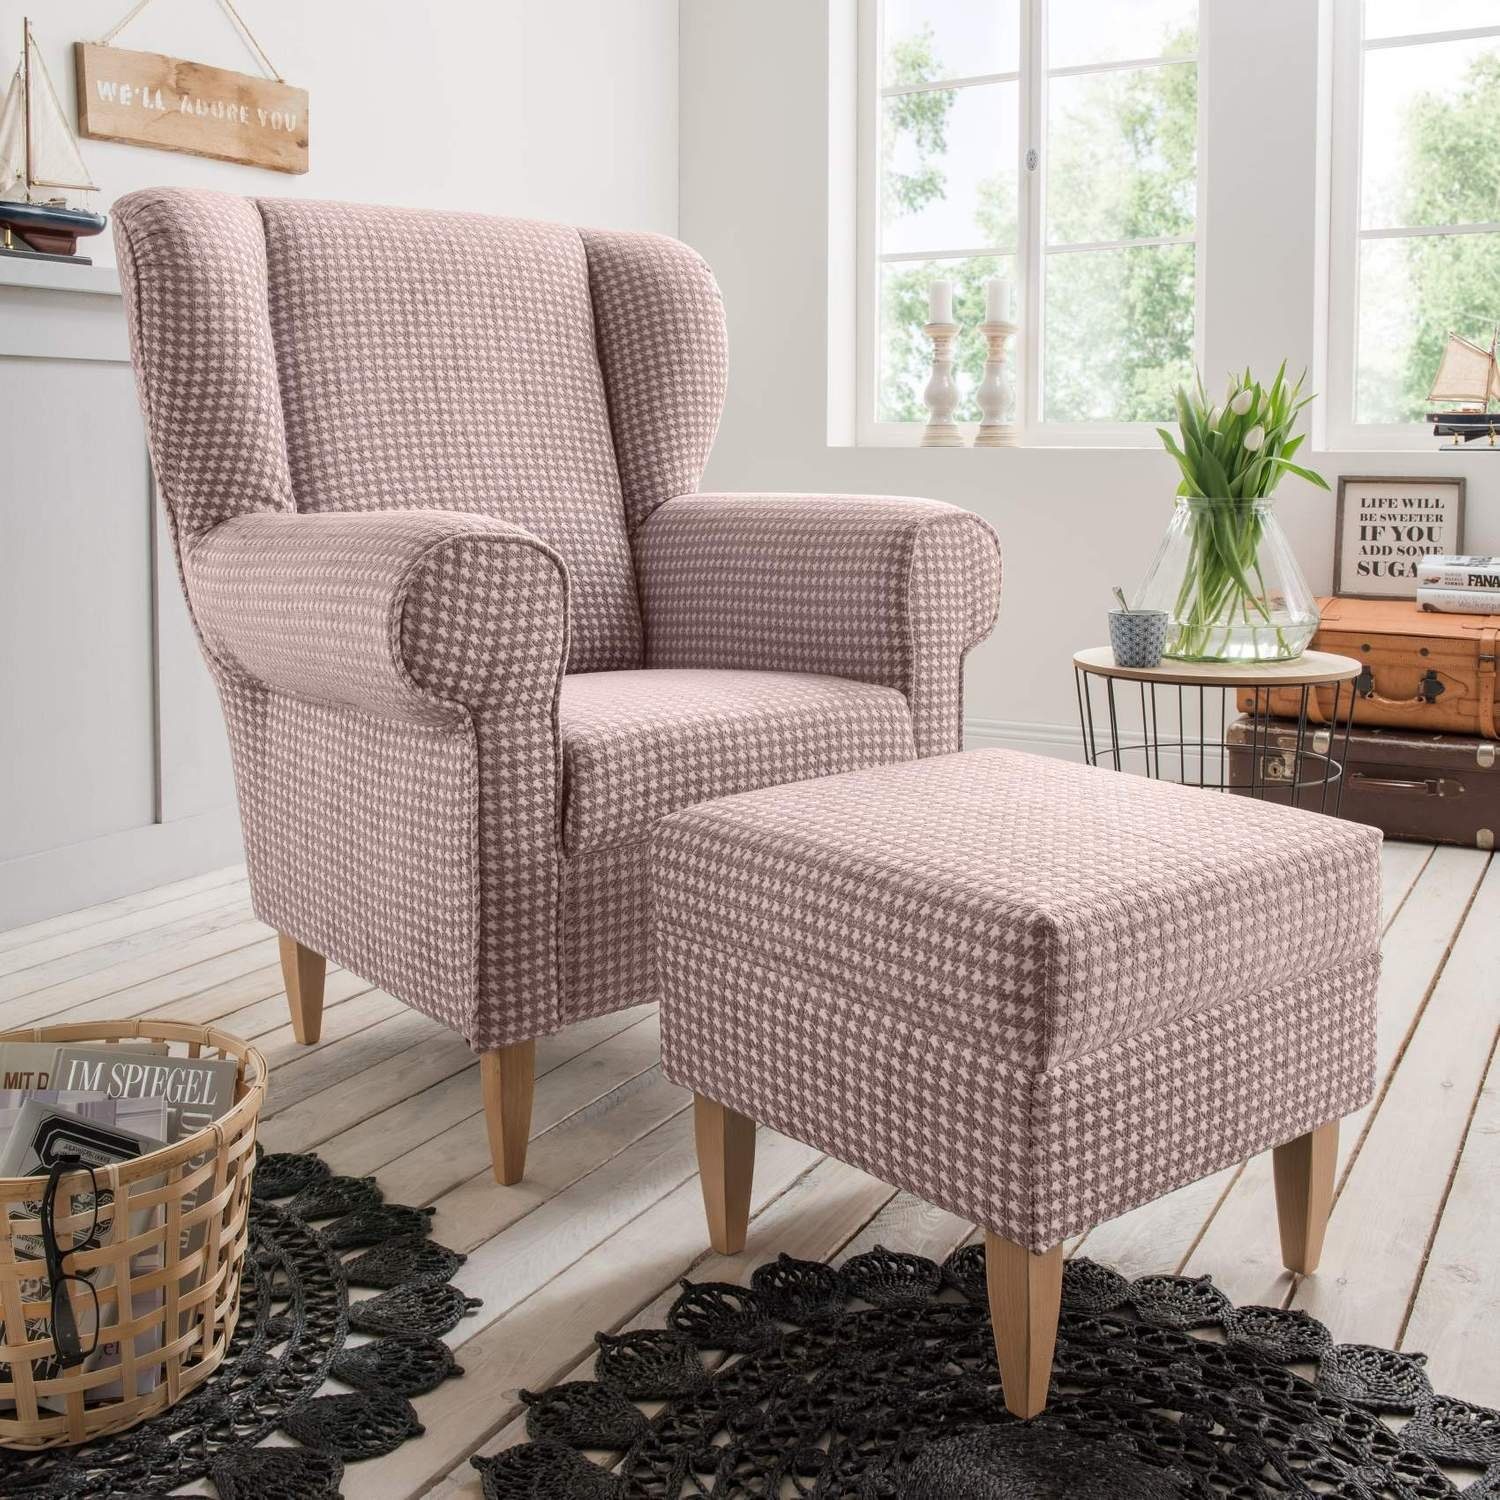 BENFORMATO HOME COLLECTION Stoff AVERSA Flamingo Ohrensessel Talento Polstersessel Loungesessel